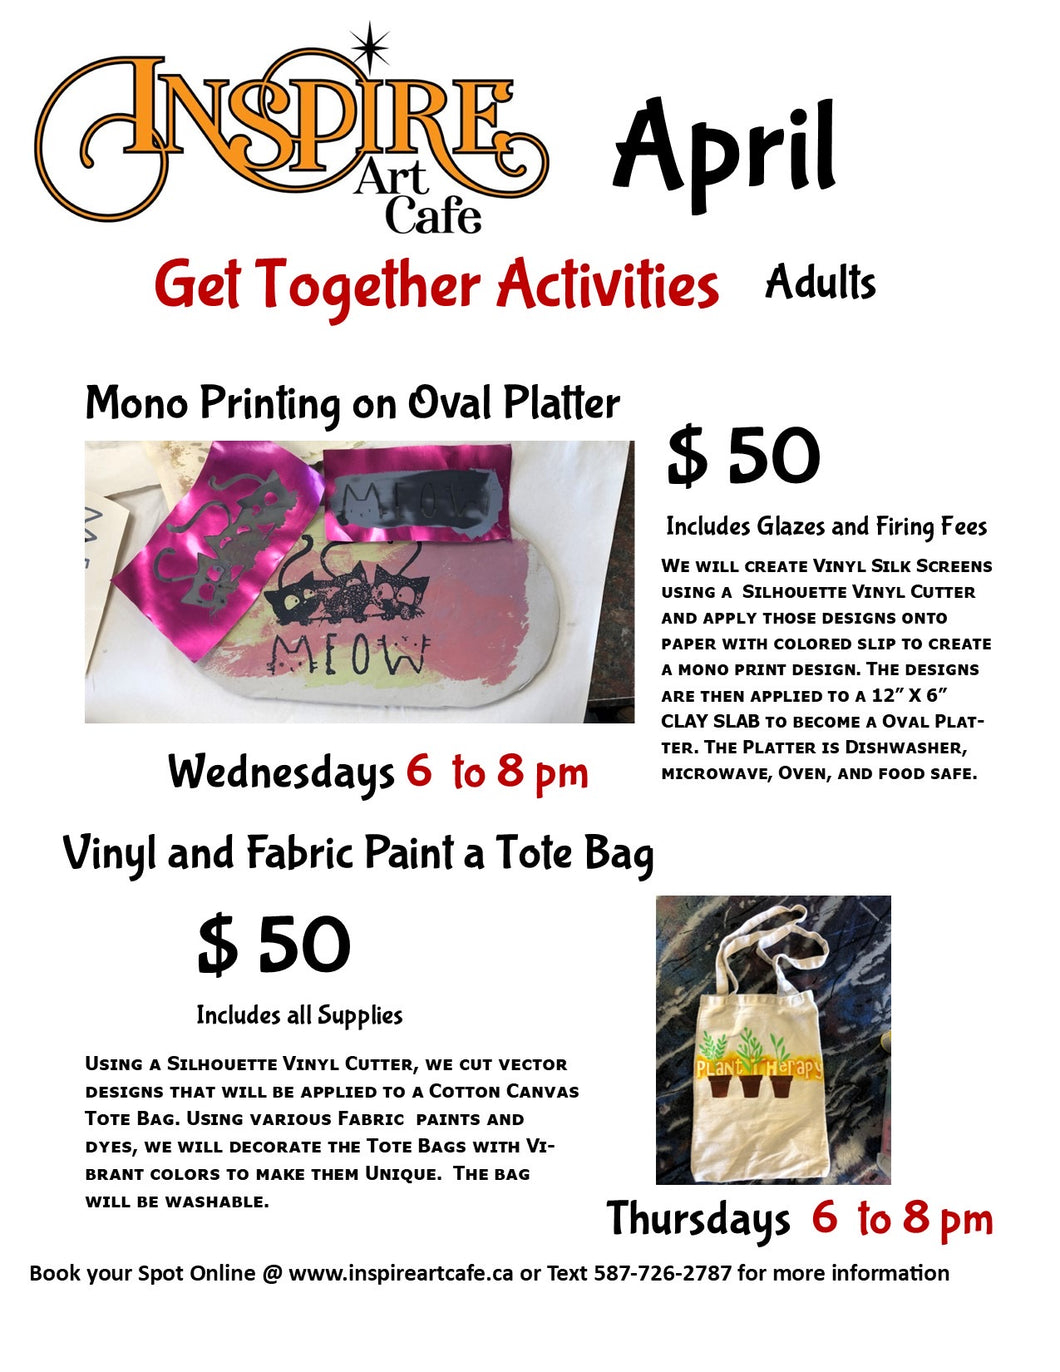 Get Together Activity Mono Printing on Oval Platter April 24